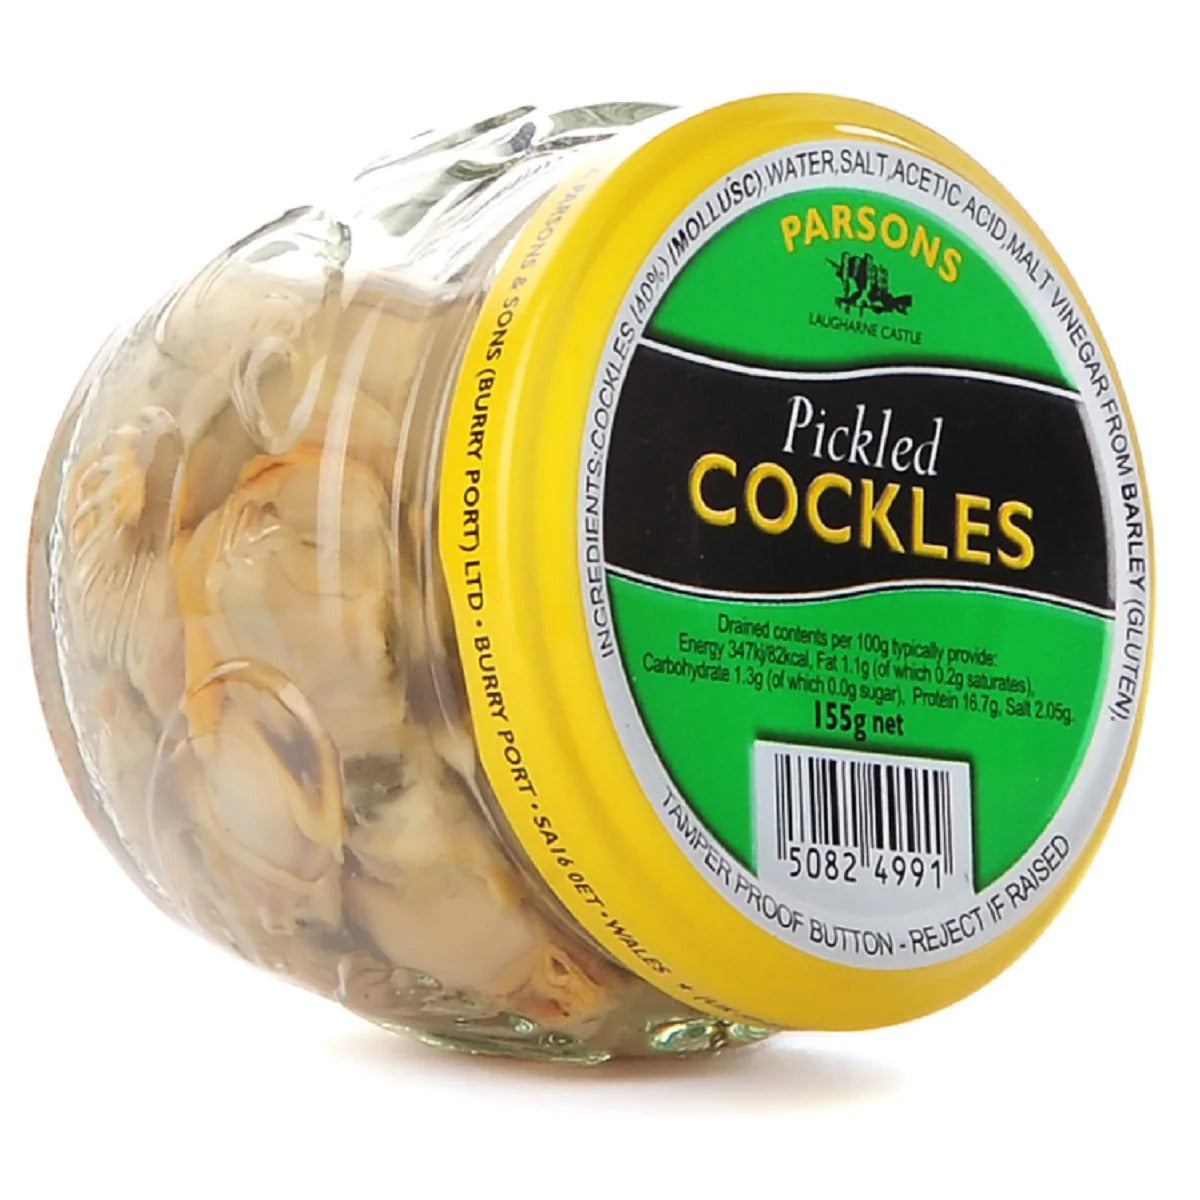 A jar of Parsons - Pickled Cockles - 155g on a white background.